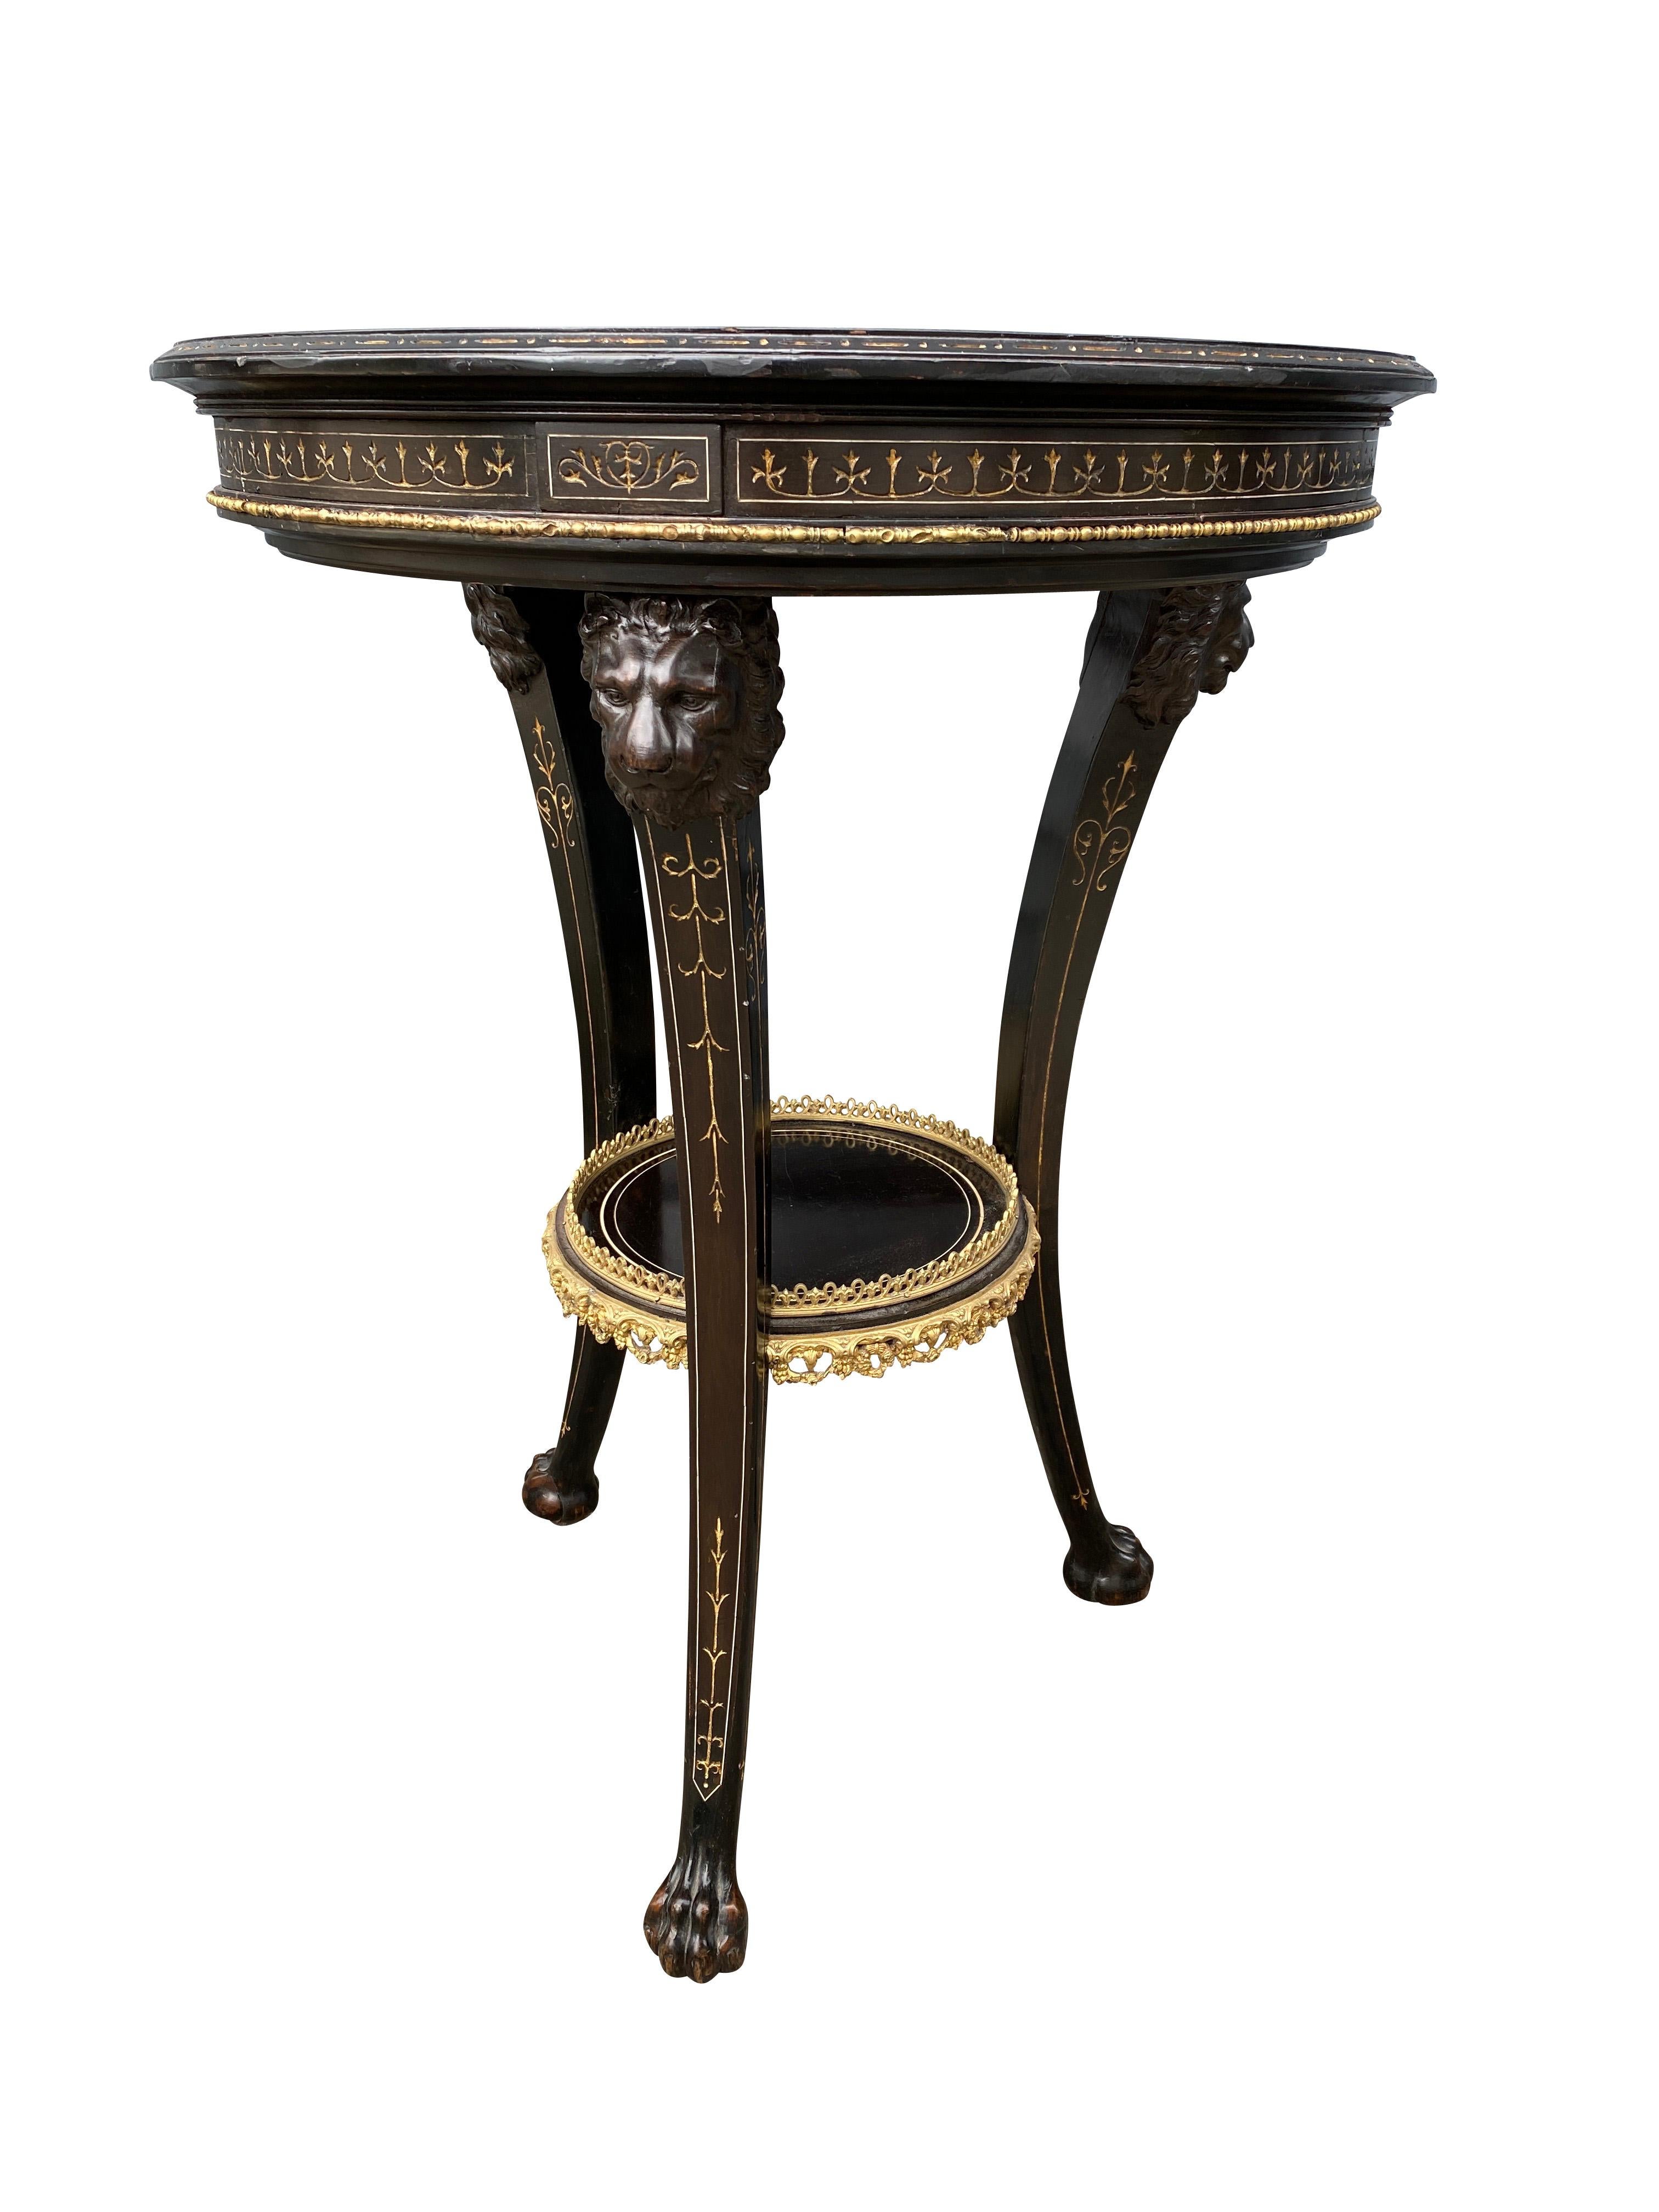 The top with central 'Doves Of Pliny' surrounded by famous buildings of Rome including the Colosseum , Pantheon , St Peters etc. Set in an American Eastlake style base with Herter Bros characteristics. Cast gilt bronze applied trim and gilt incised